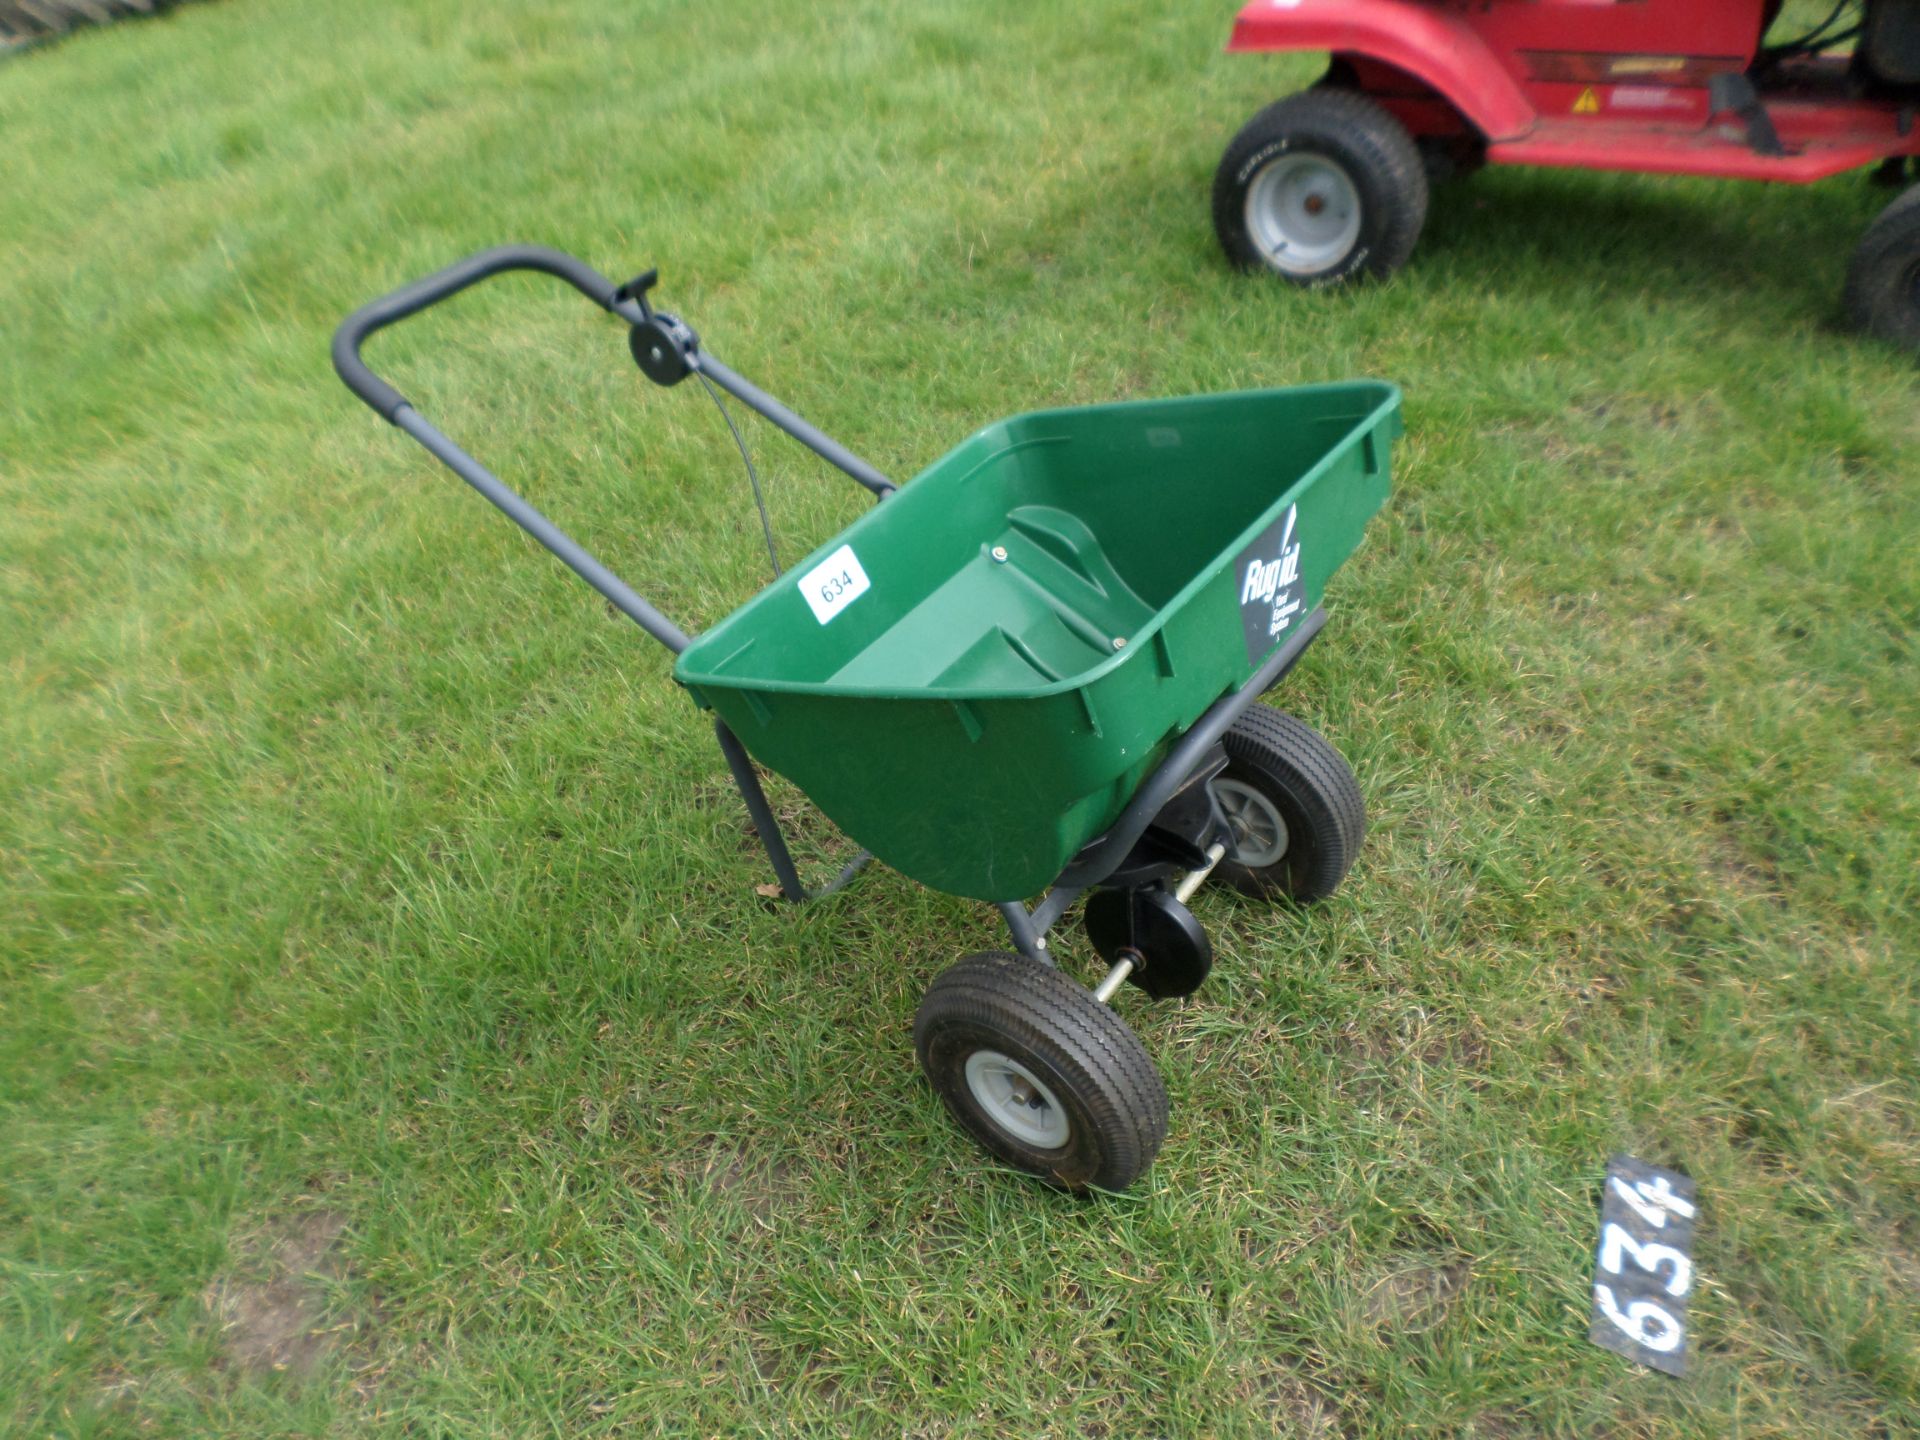 Rug-id semi professional walk behind lawn top dresser, previous very limited use, full workingNO VAT